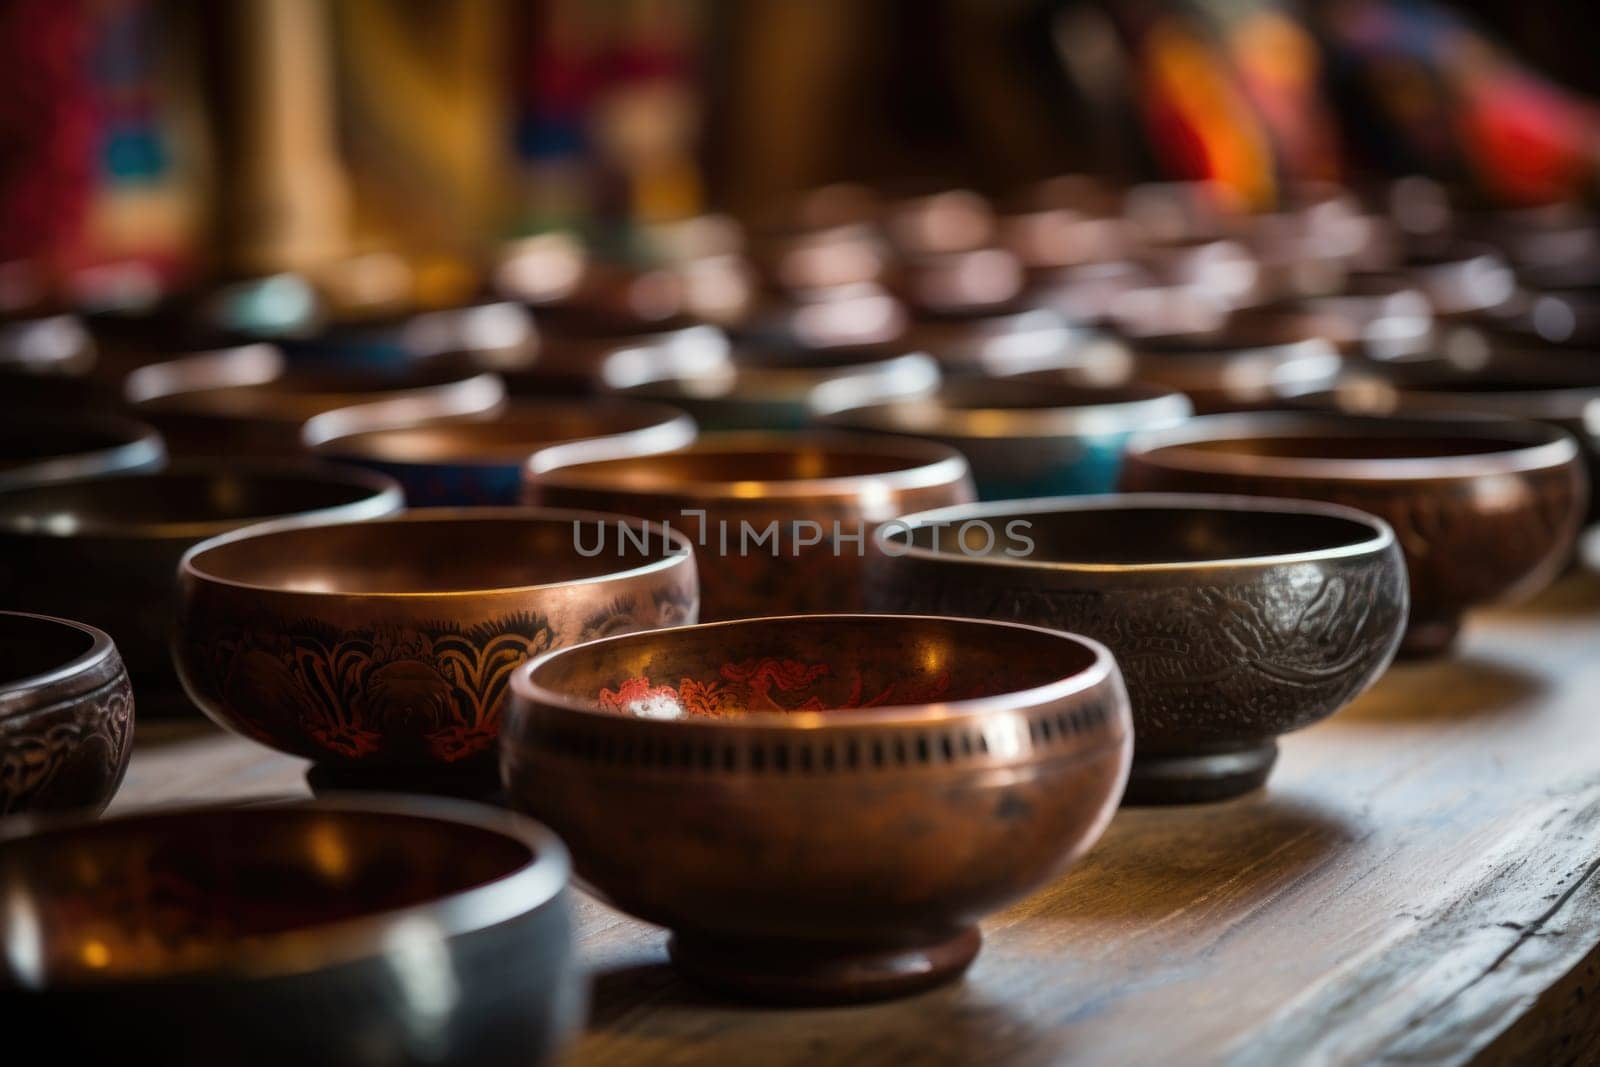 There are many Tibetan bowls on the table by Lobachad